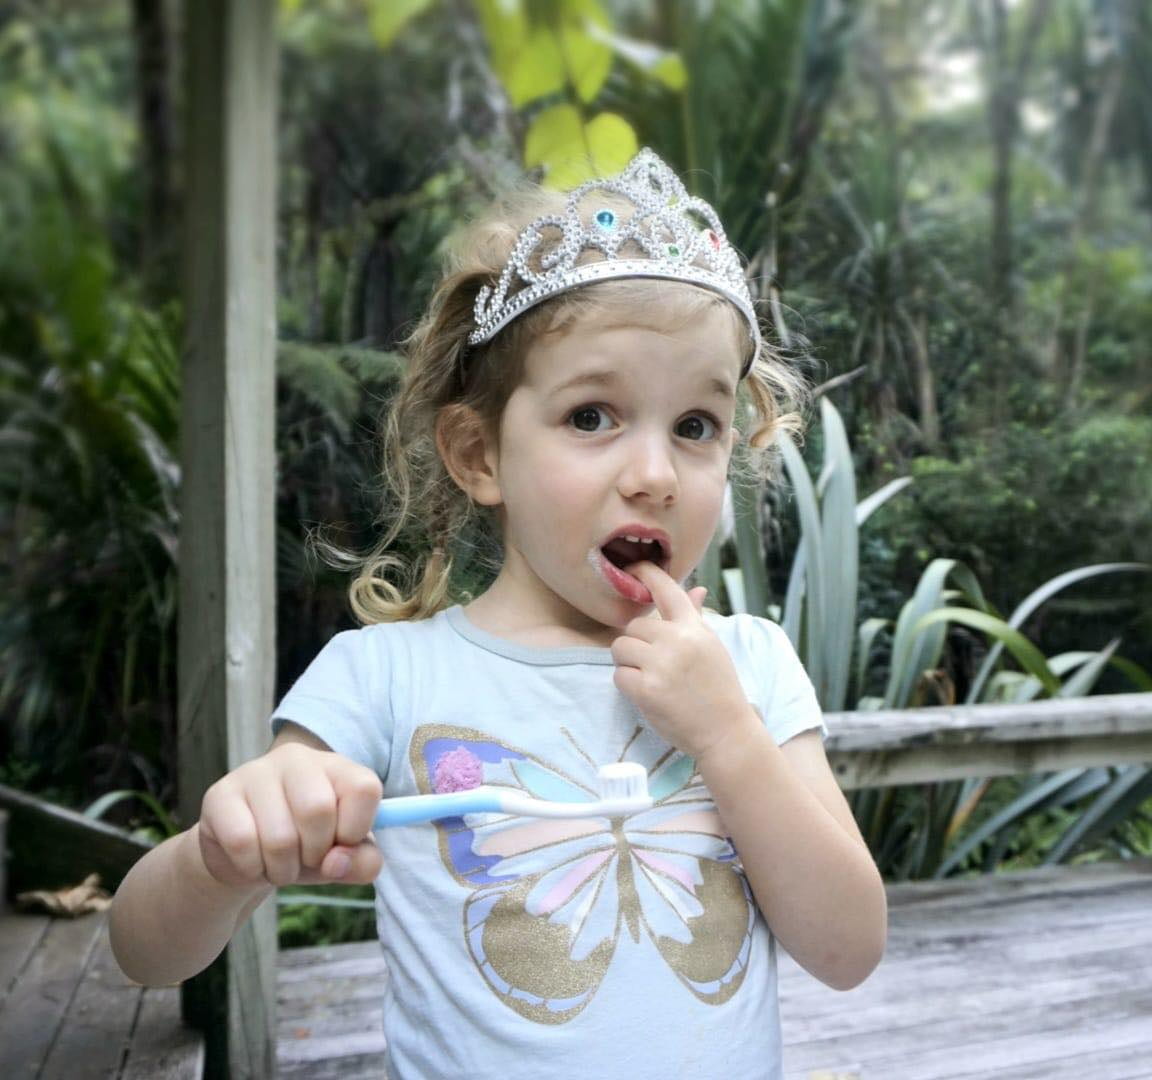 A young girl in a tiara holds a toothbrush with toothpaste. She has her finger in her mouth and a quizzical look on her face